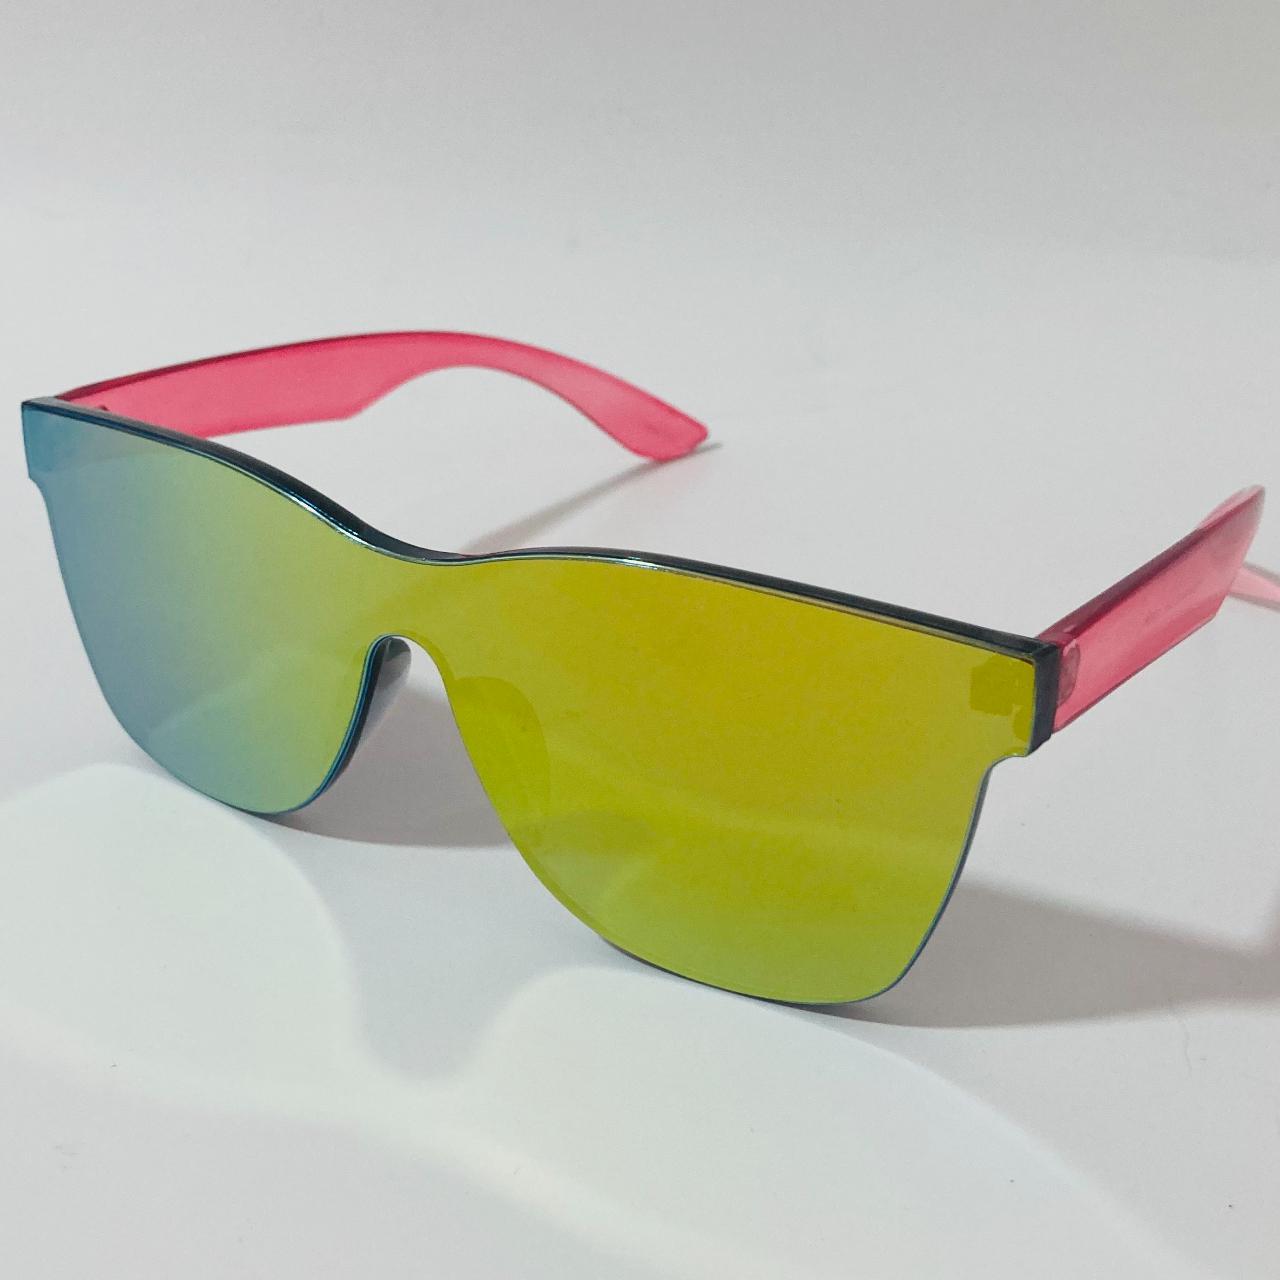 Men's Green and Pink Sunglasses